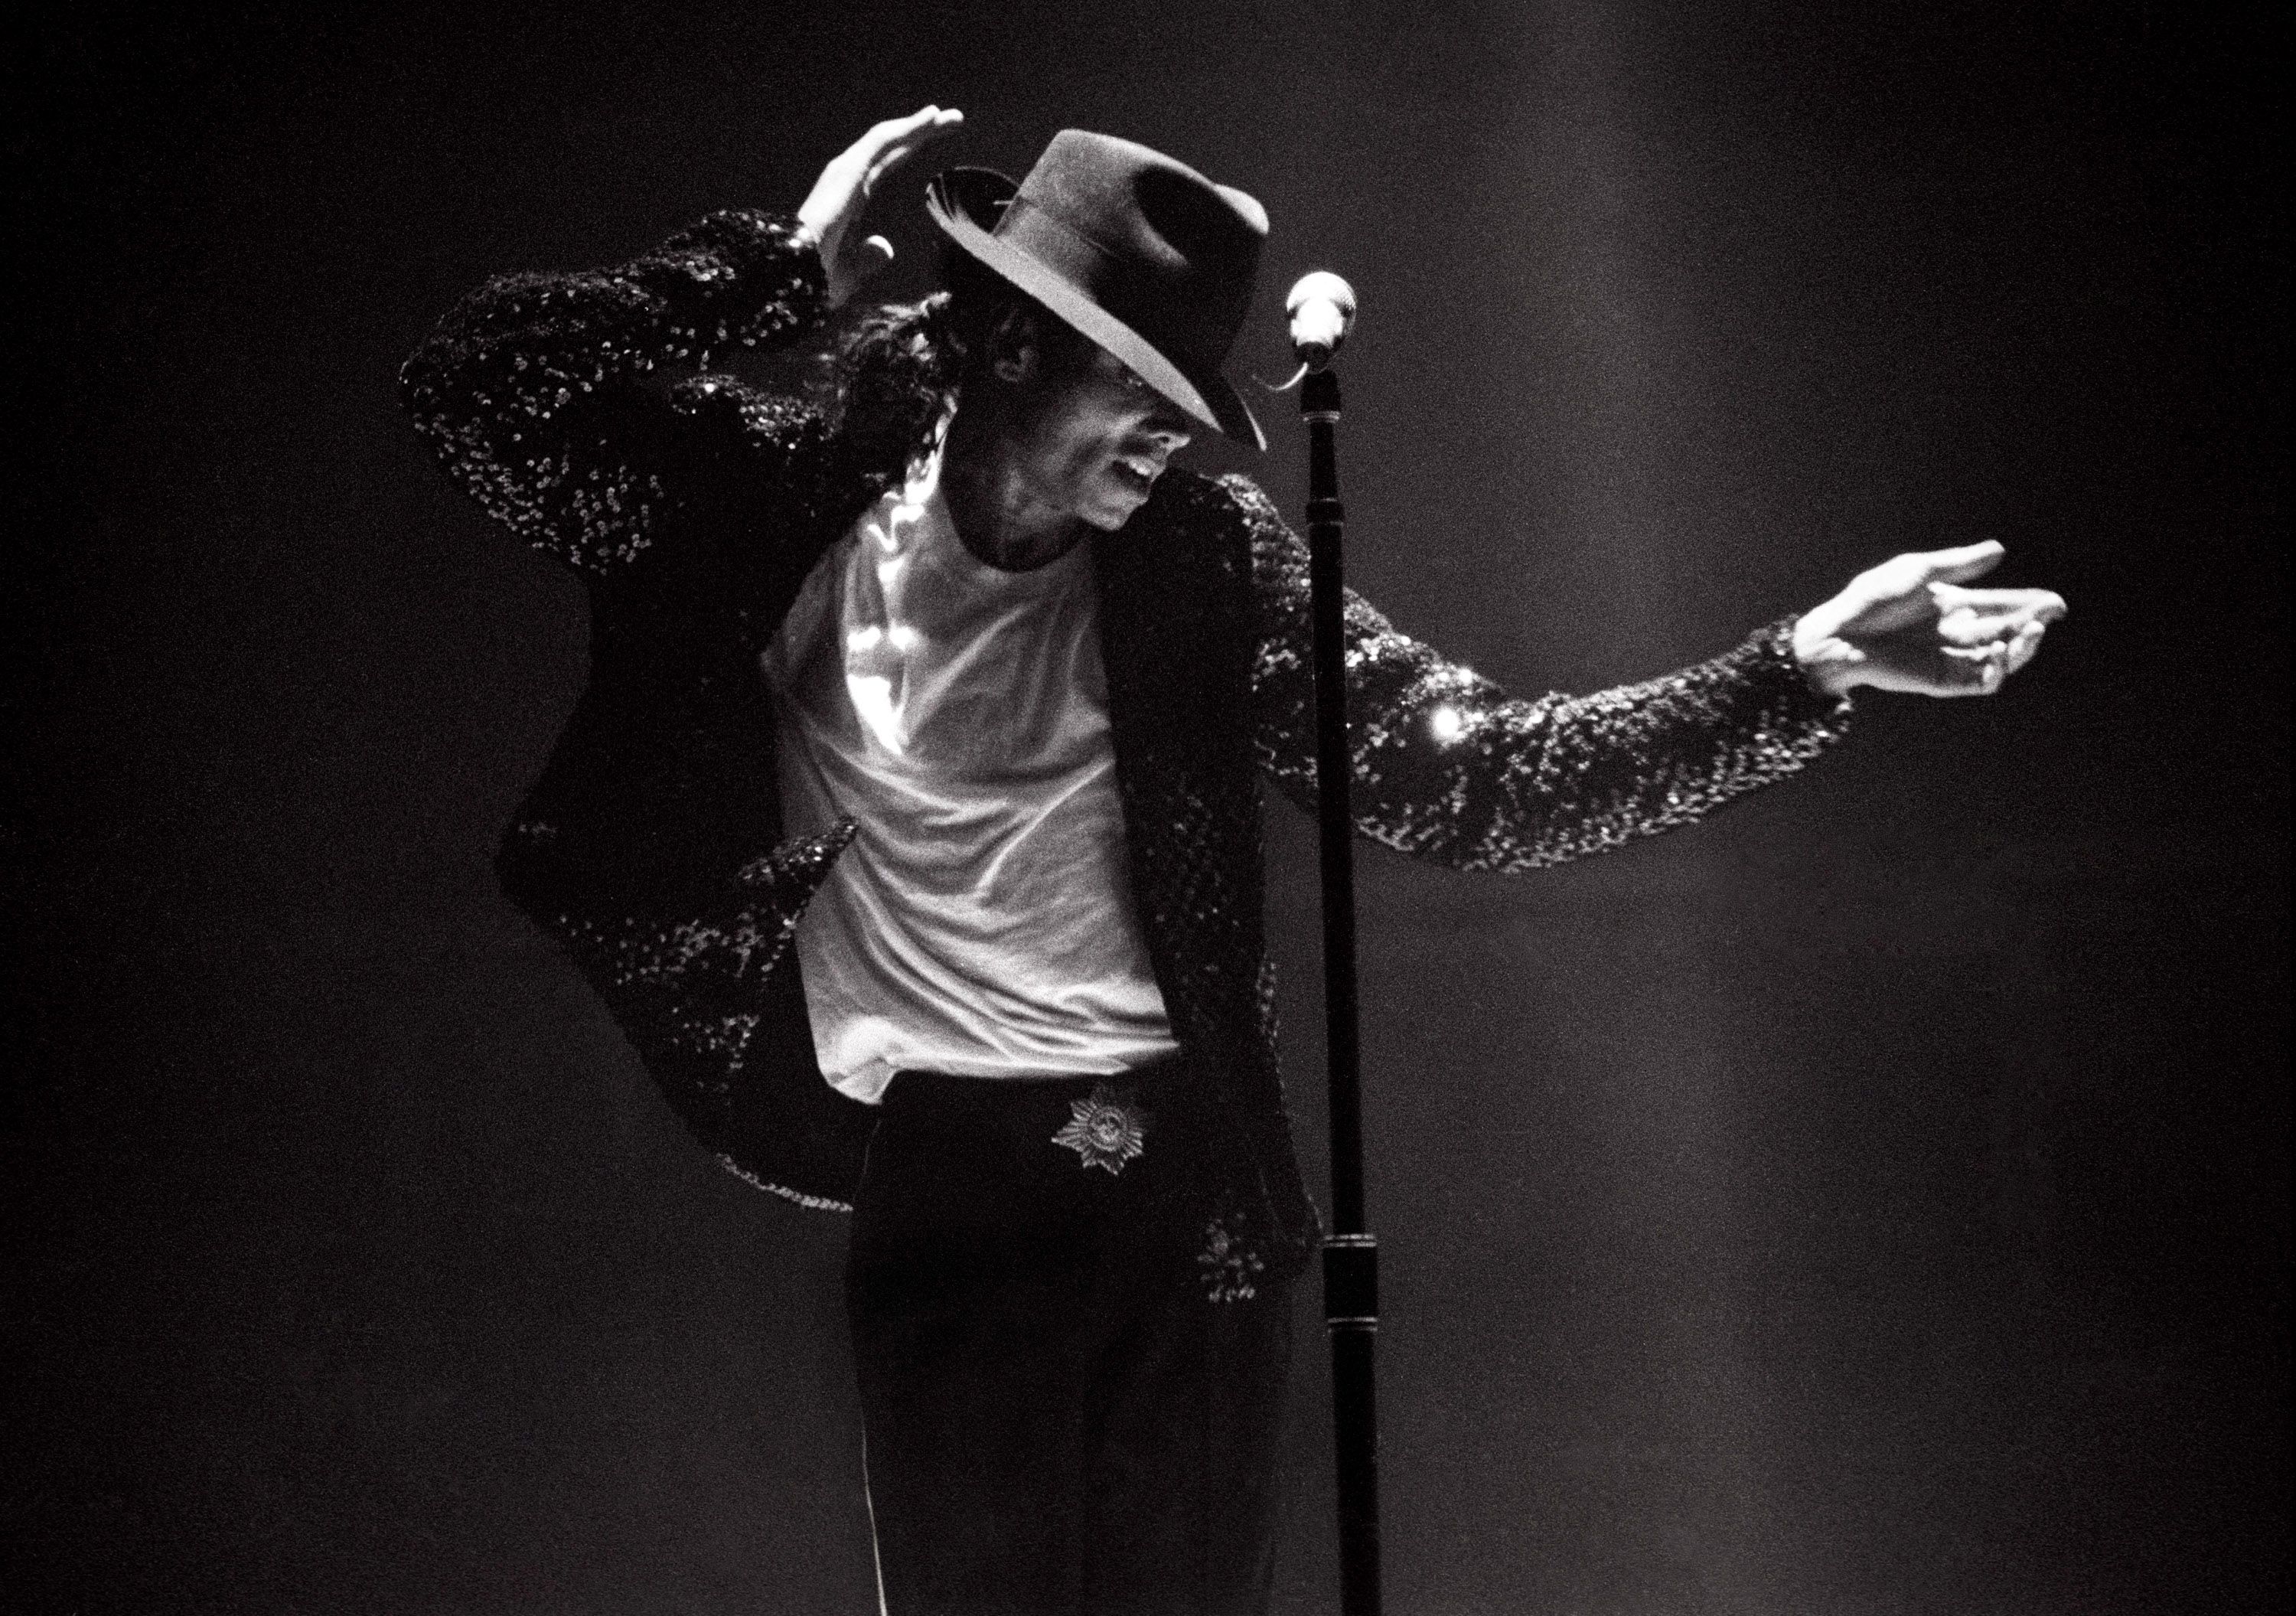 Whose moves and looks inspired Michael Jackson, the iconic 'King of Pop'?